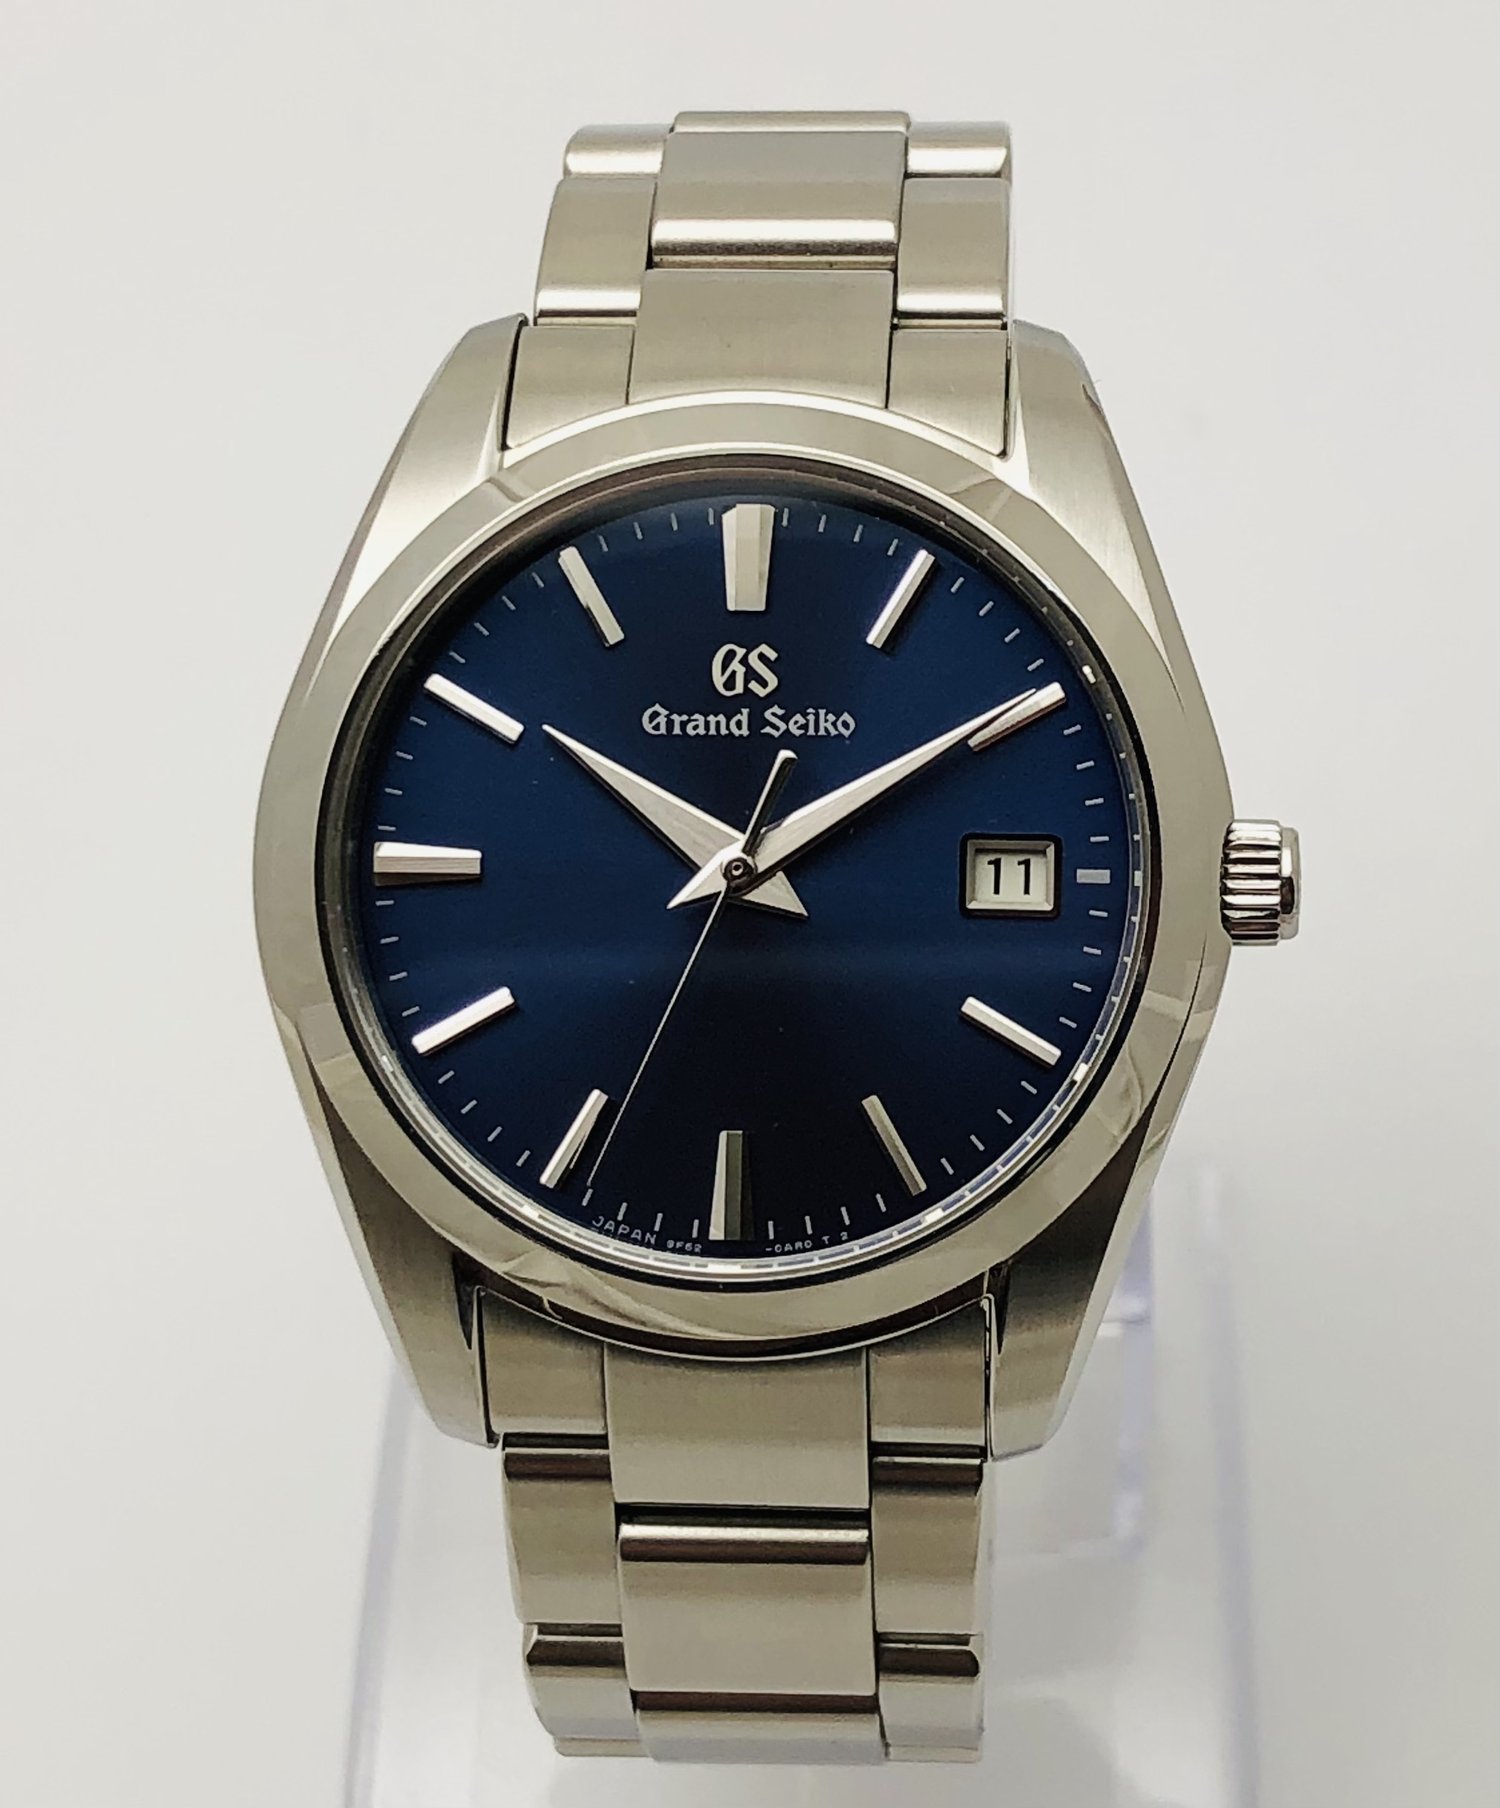 Grand Seiko 2021 Gentleman's Classic Quartz Blue Dial Calendar Steel  Wristwatch Ref SBGX265 with Box and Papers MINT Condition. — About Time